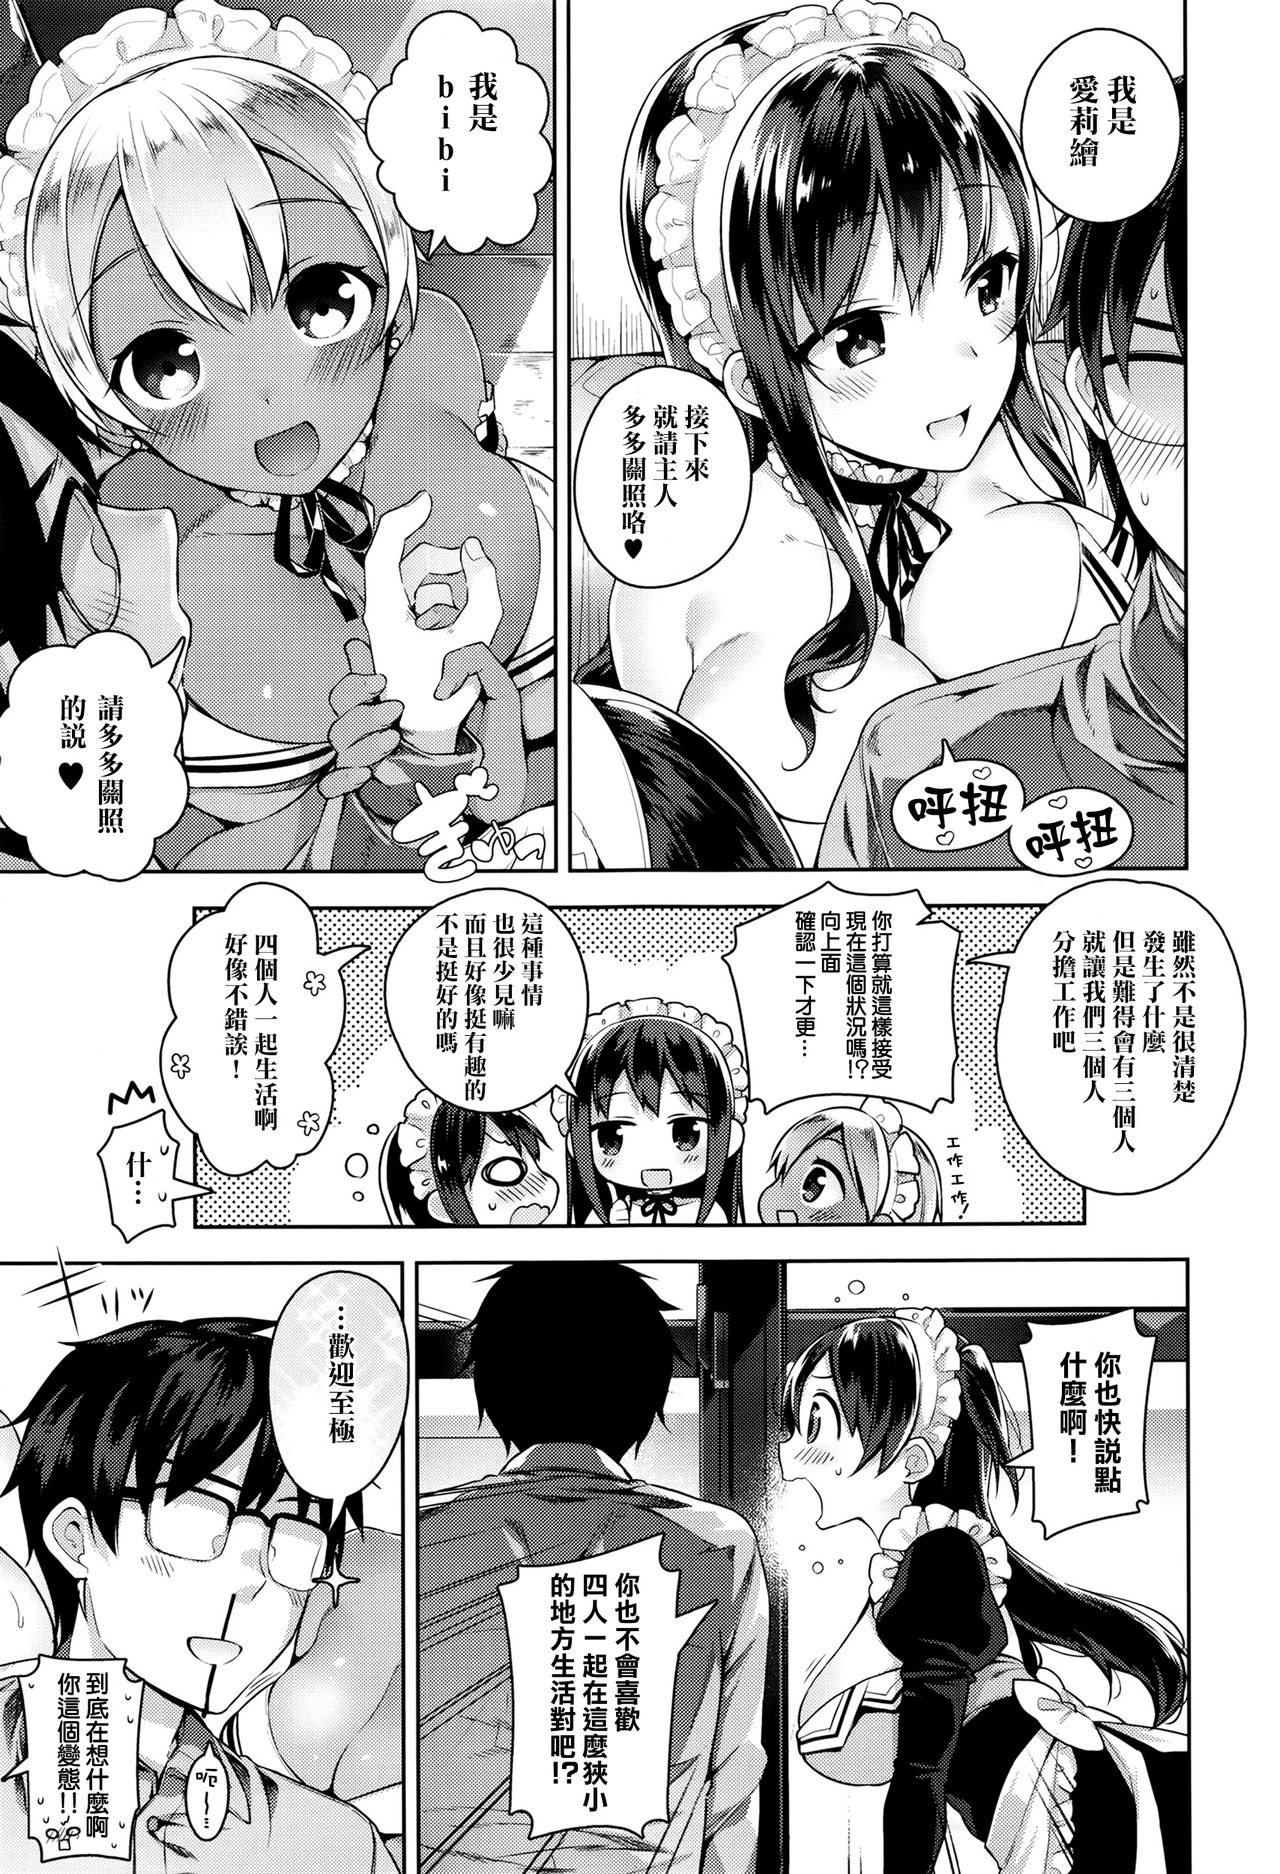 [Neet] Erie Dere - Please choose me, my master. (COMIC ExE 01) [Chinese] [无毒汉化组] [にぃと] エリエデレ (コミック エグゼ 01) [中文翻譯]